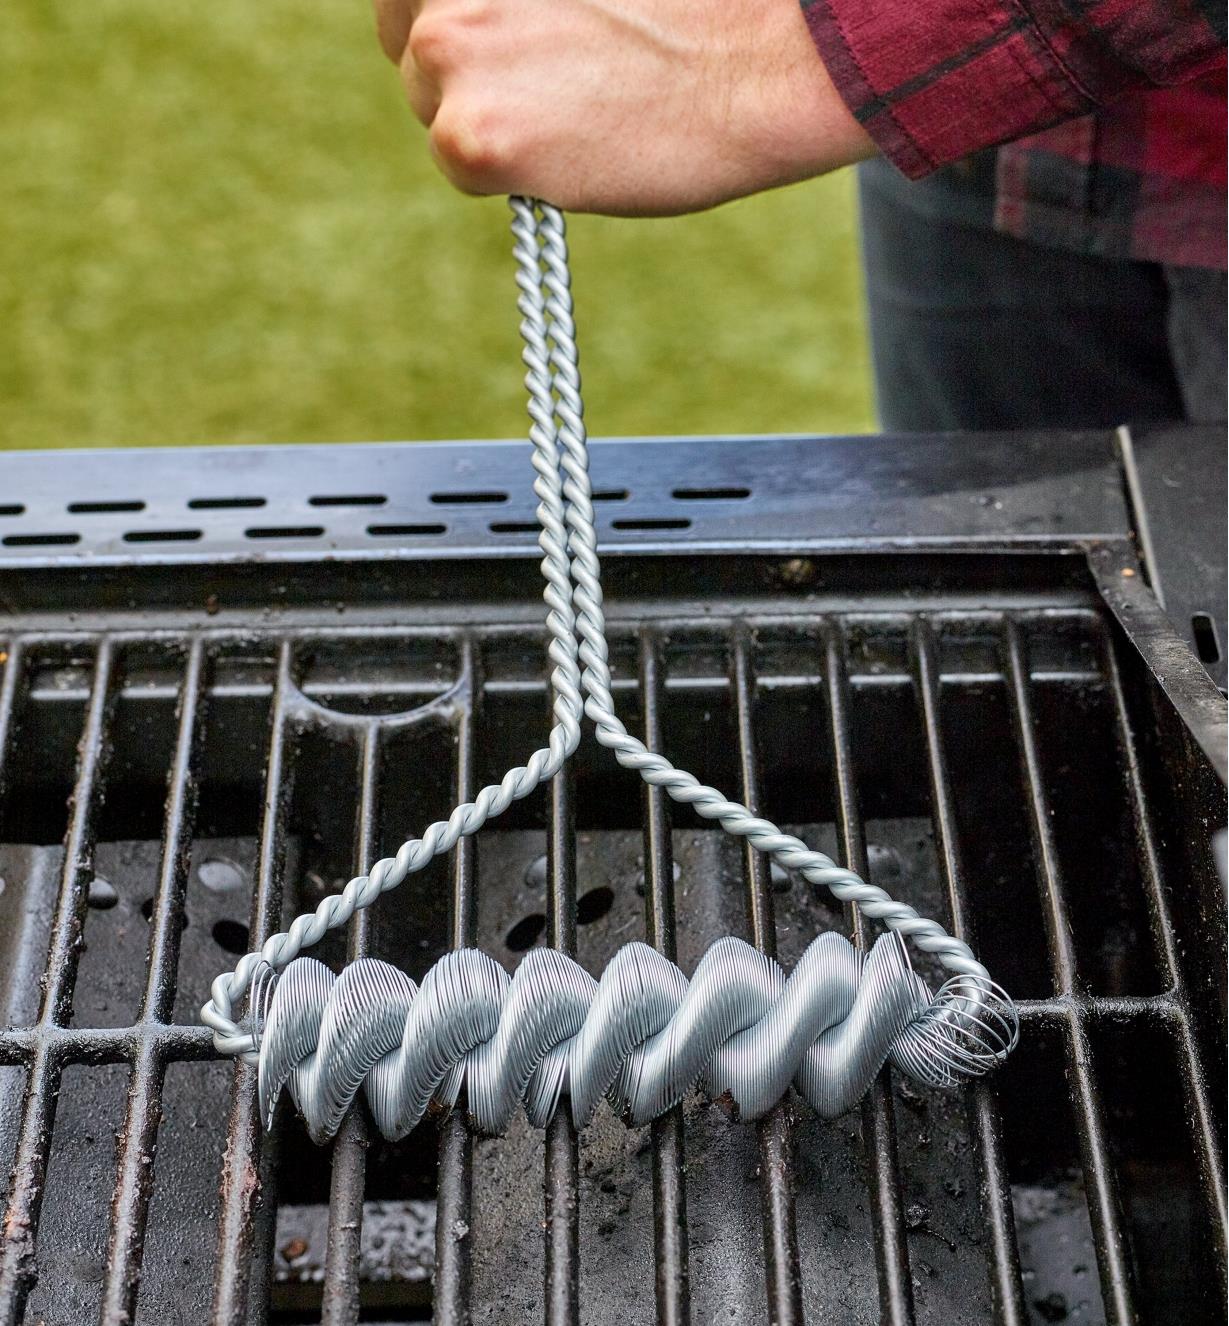 Close-up of the bristle-free barbecue brush head, showing coils flexing around the barbecue grating